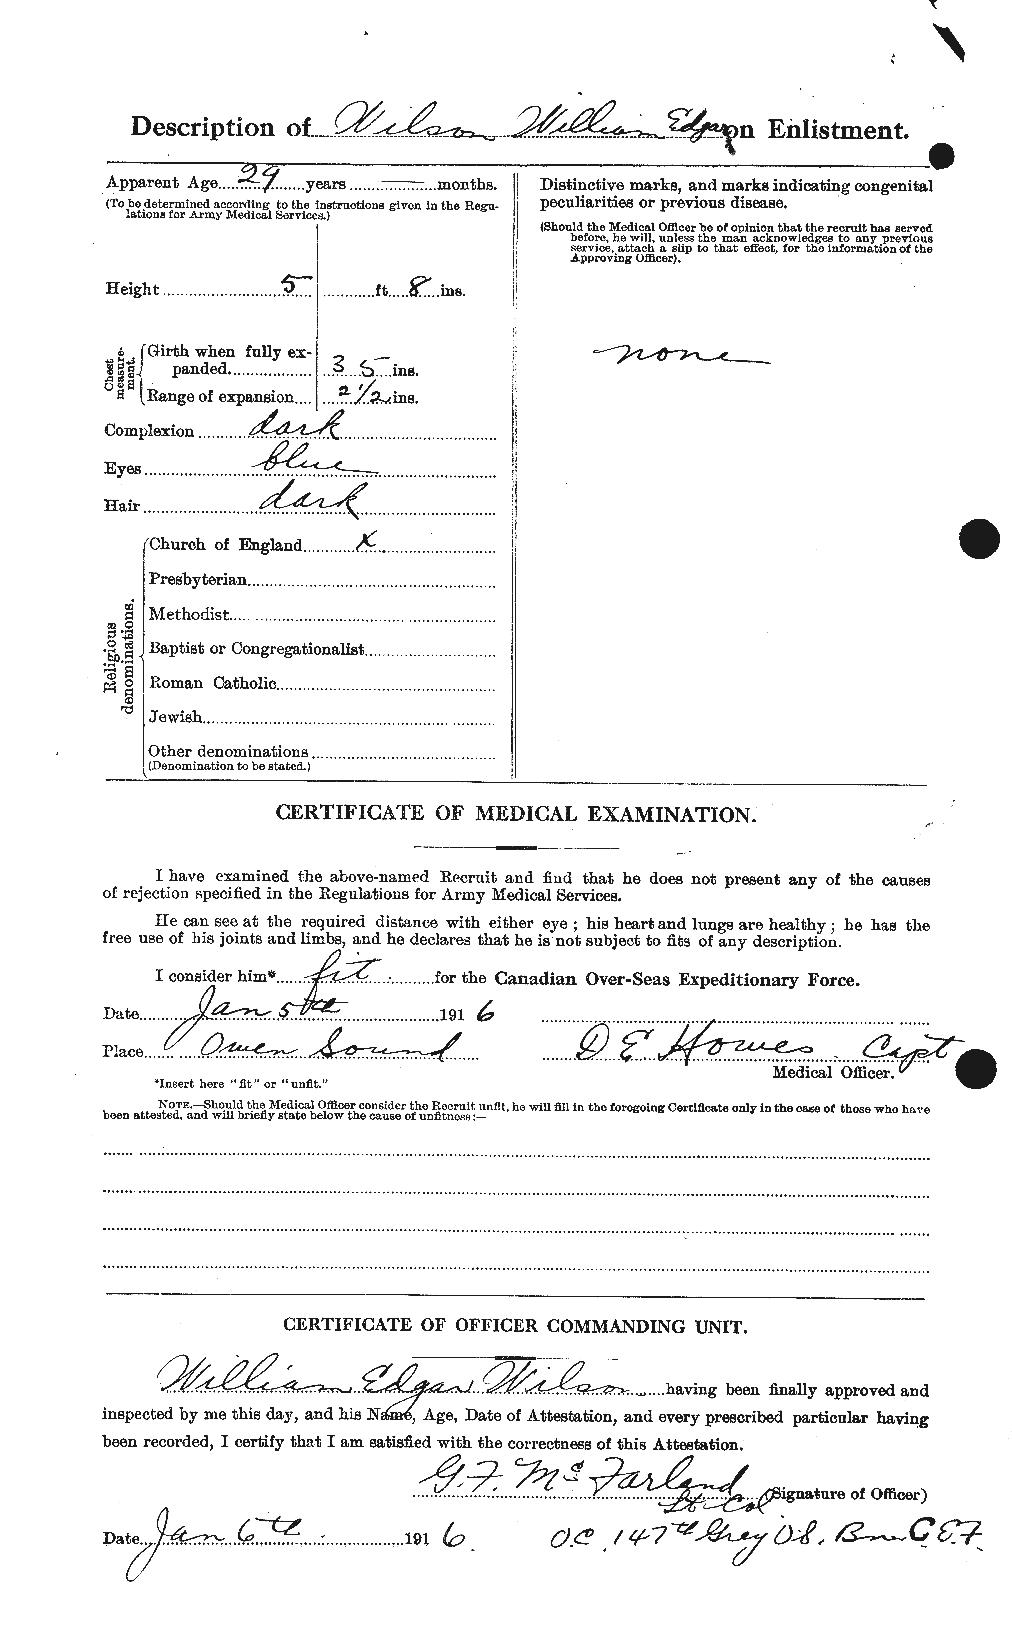 Personnel Records of the First World War - CEF 681972b